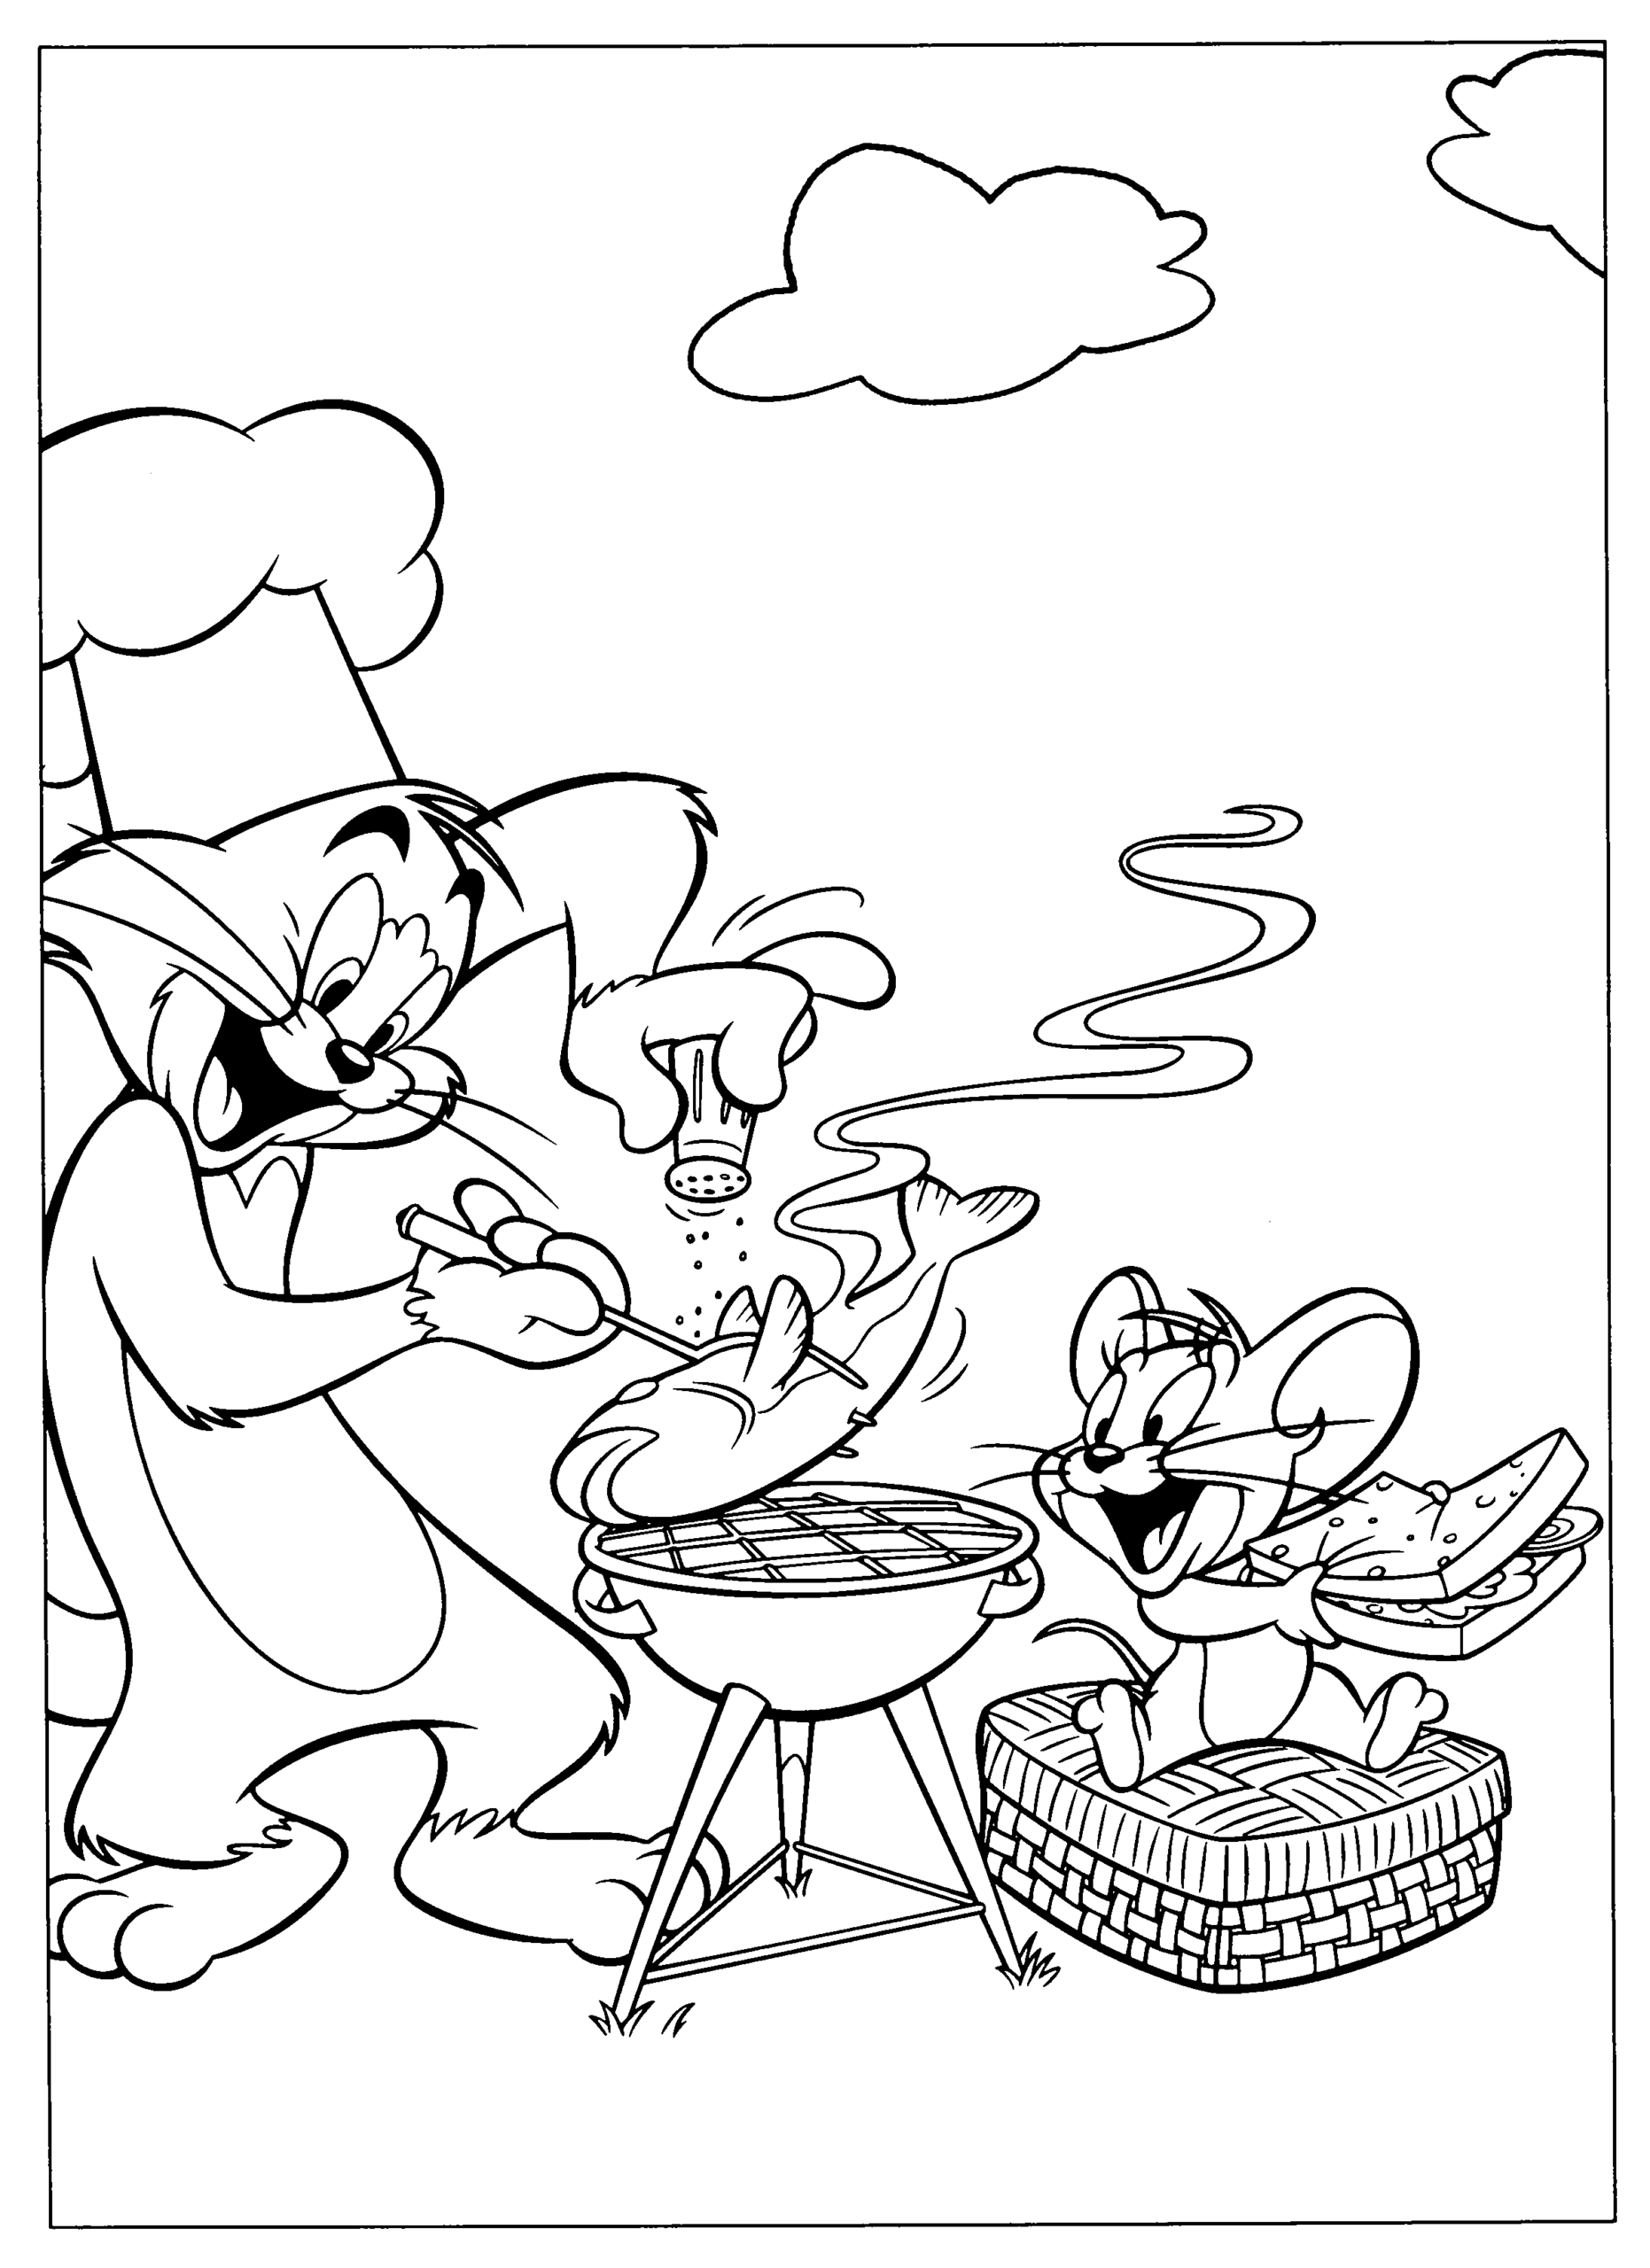 Tom and Jerry Coloring Pages TV Film Tom and Jerry Photo Printable 2020 10234 Coloring4free